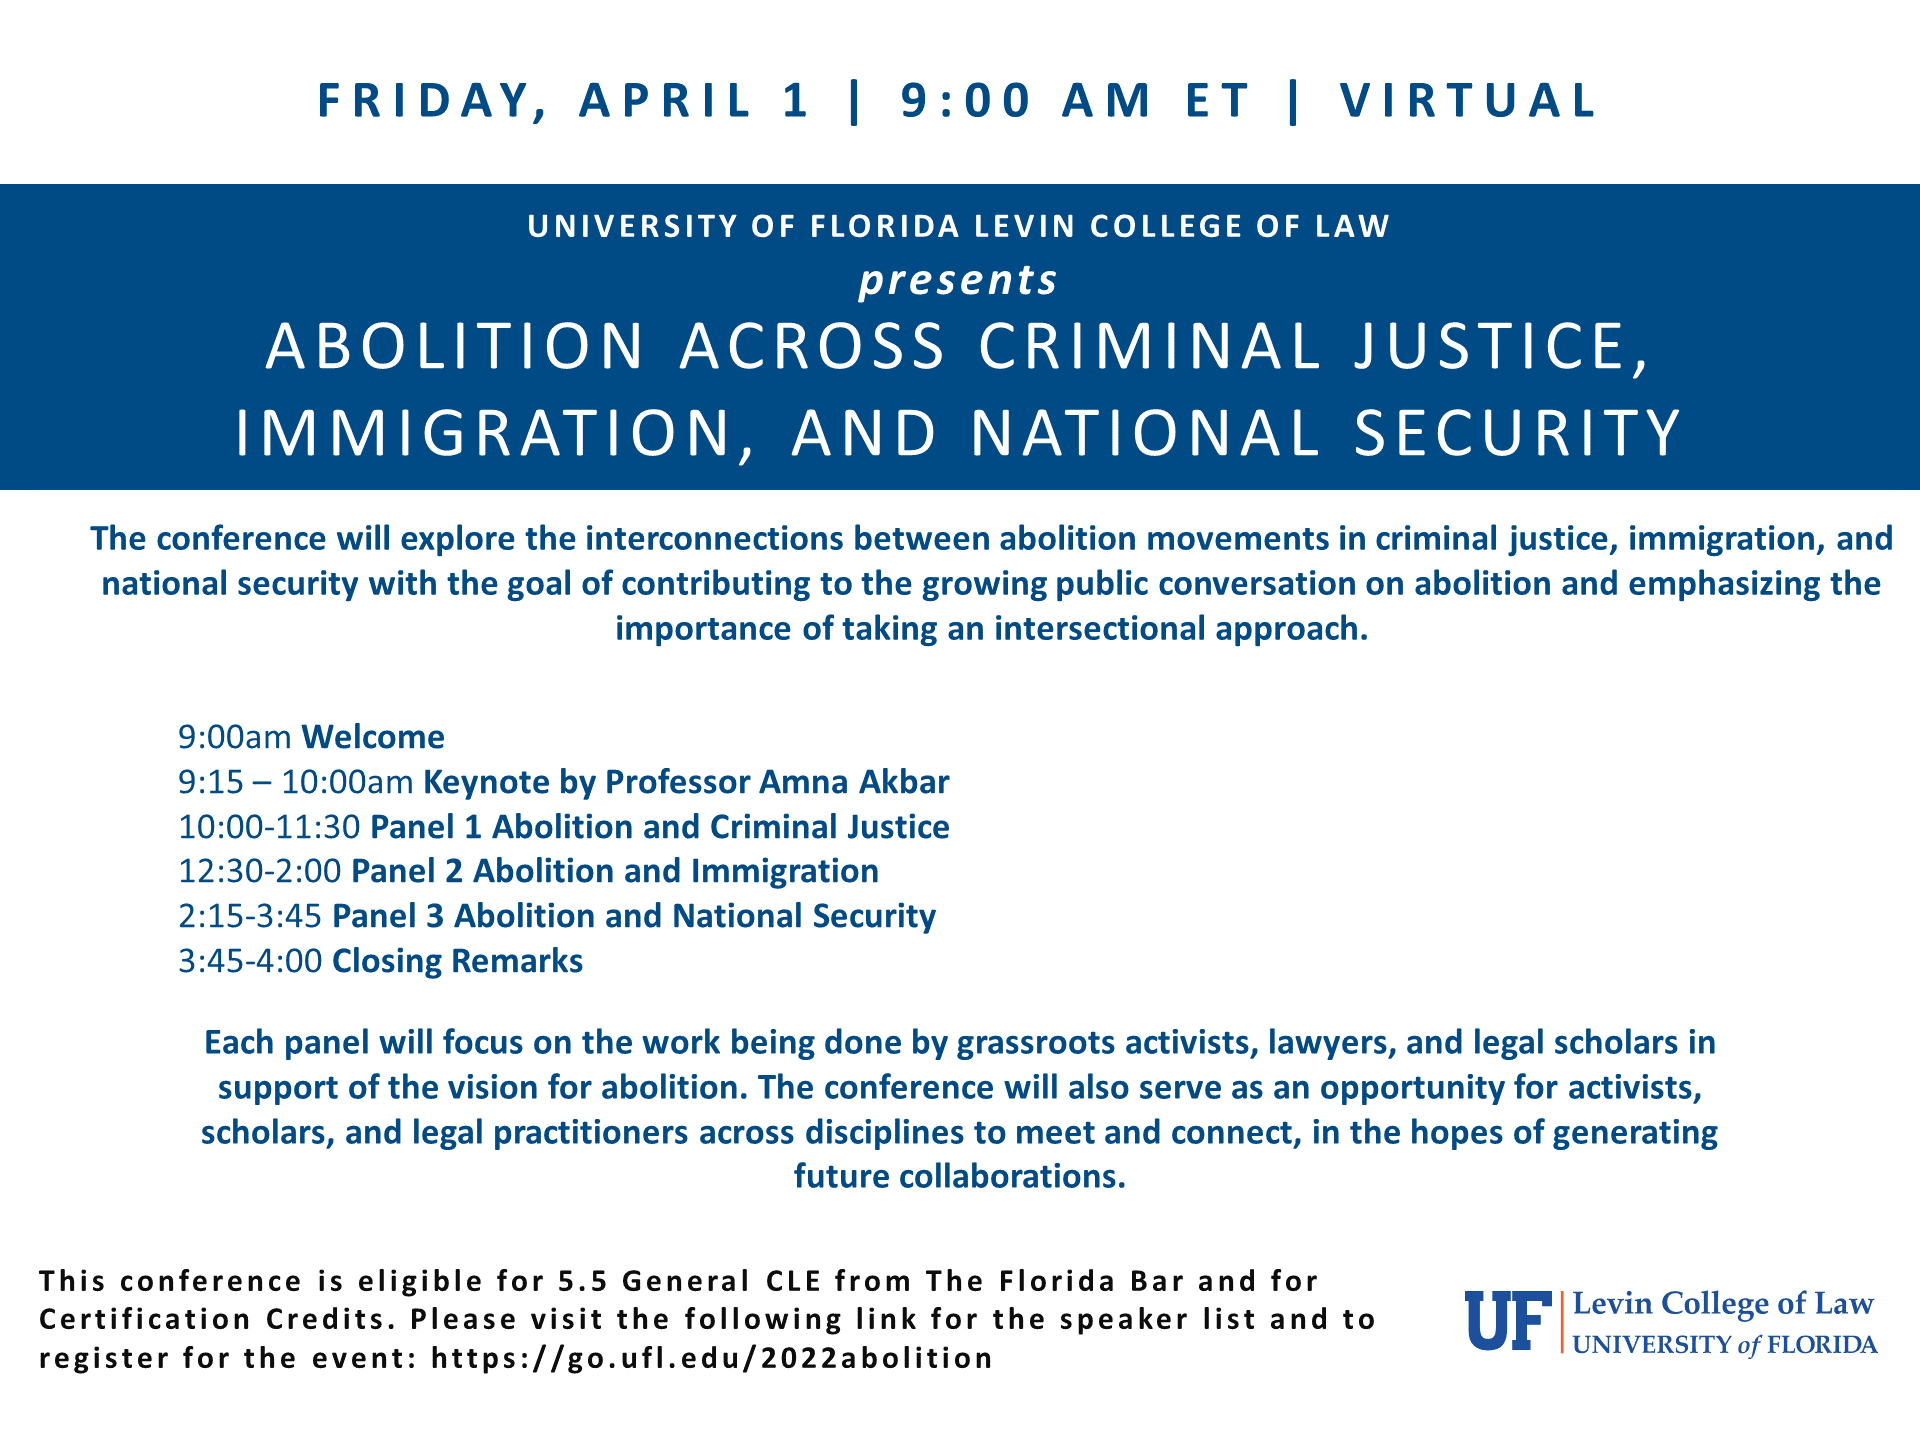 On blue background in white text “University of Florida Levin College of Law Presents Abolition Across Criminal Justice, Immigration, and National Security”. Below on white background in blue text “The conference will explore the interconnections between abolition movements in criminal justice, immigration and national security with the goal of contributing to the growing public conversation on abolition and emphasizing the importance of taking an intersectional approach. 9:00 am Welcome 9:15-10:00 am Keynote by Professor Amna Akbar 10:00-11:30 Panel 1 Abolition and Criminal Justice 12:30 - 2:00 Panel 2 Abolition and Immigration 2:15v- 3:45 Panel 3 Abolition and National Security 3:45-4:00 Closing Remarks. Each panel will focus on the work being done by grassroots activist, lawyers. And legal scholars in support of the vision for abolition. The conference will also serve as an opportunity for activist scholars and legal practitioners across disciplines to meet and connect, in the hopes of generating future collaborations.” Below in black text “This conference is eligible for 5.5  general cle from the Florida Bar and for Certification Credits. Please visit the following link for the speaker list and to register for the event: https://goufl.edu/2022abolition “ to the left is the college logo in blue and orange which reads “UF | Levin College of Law University of Florida”